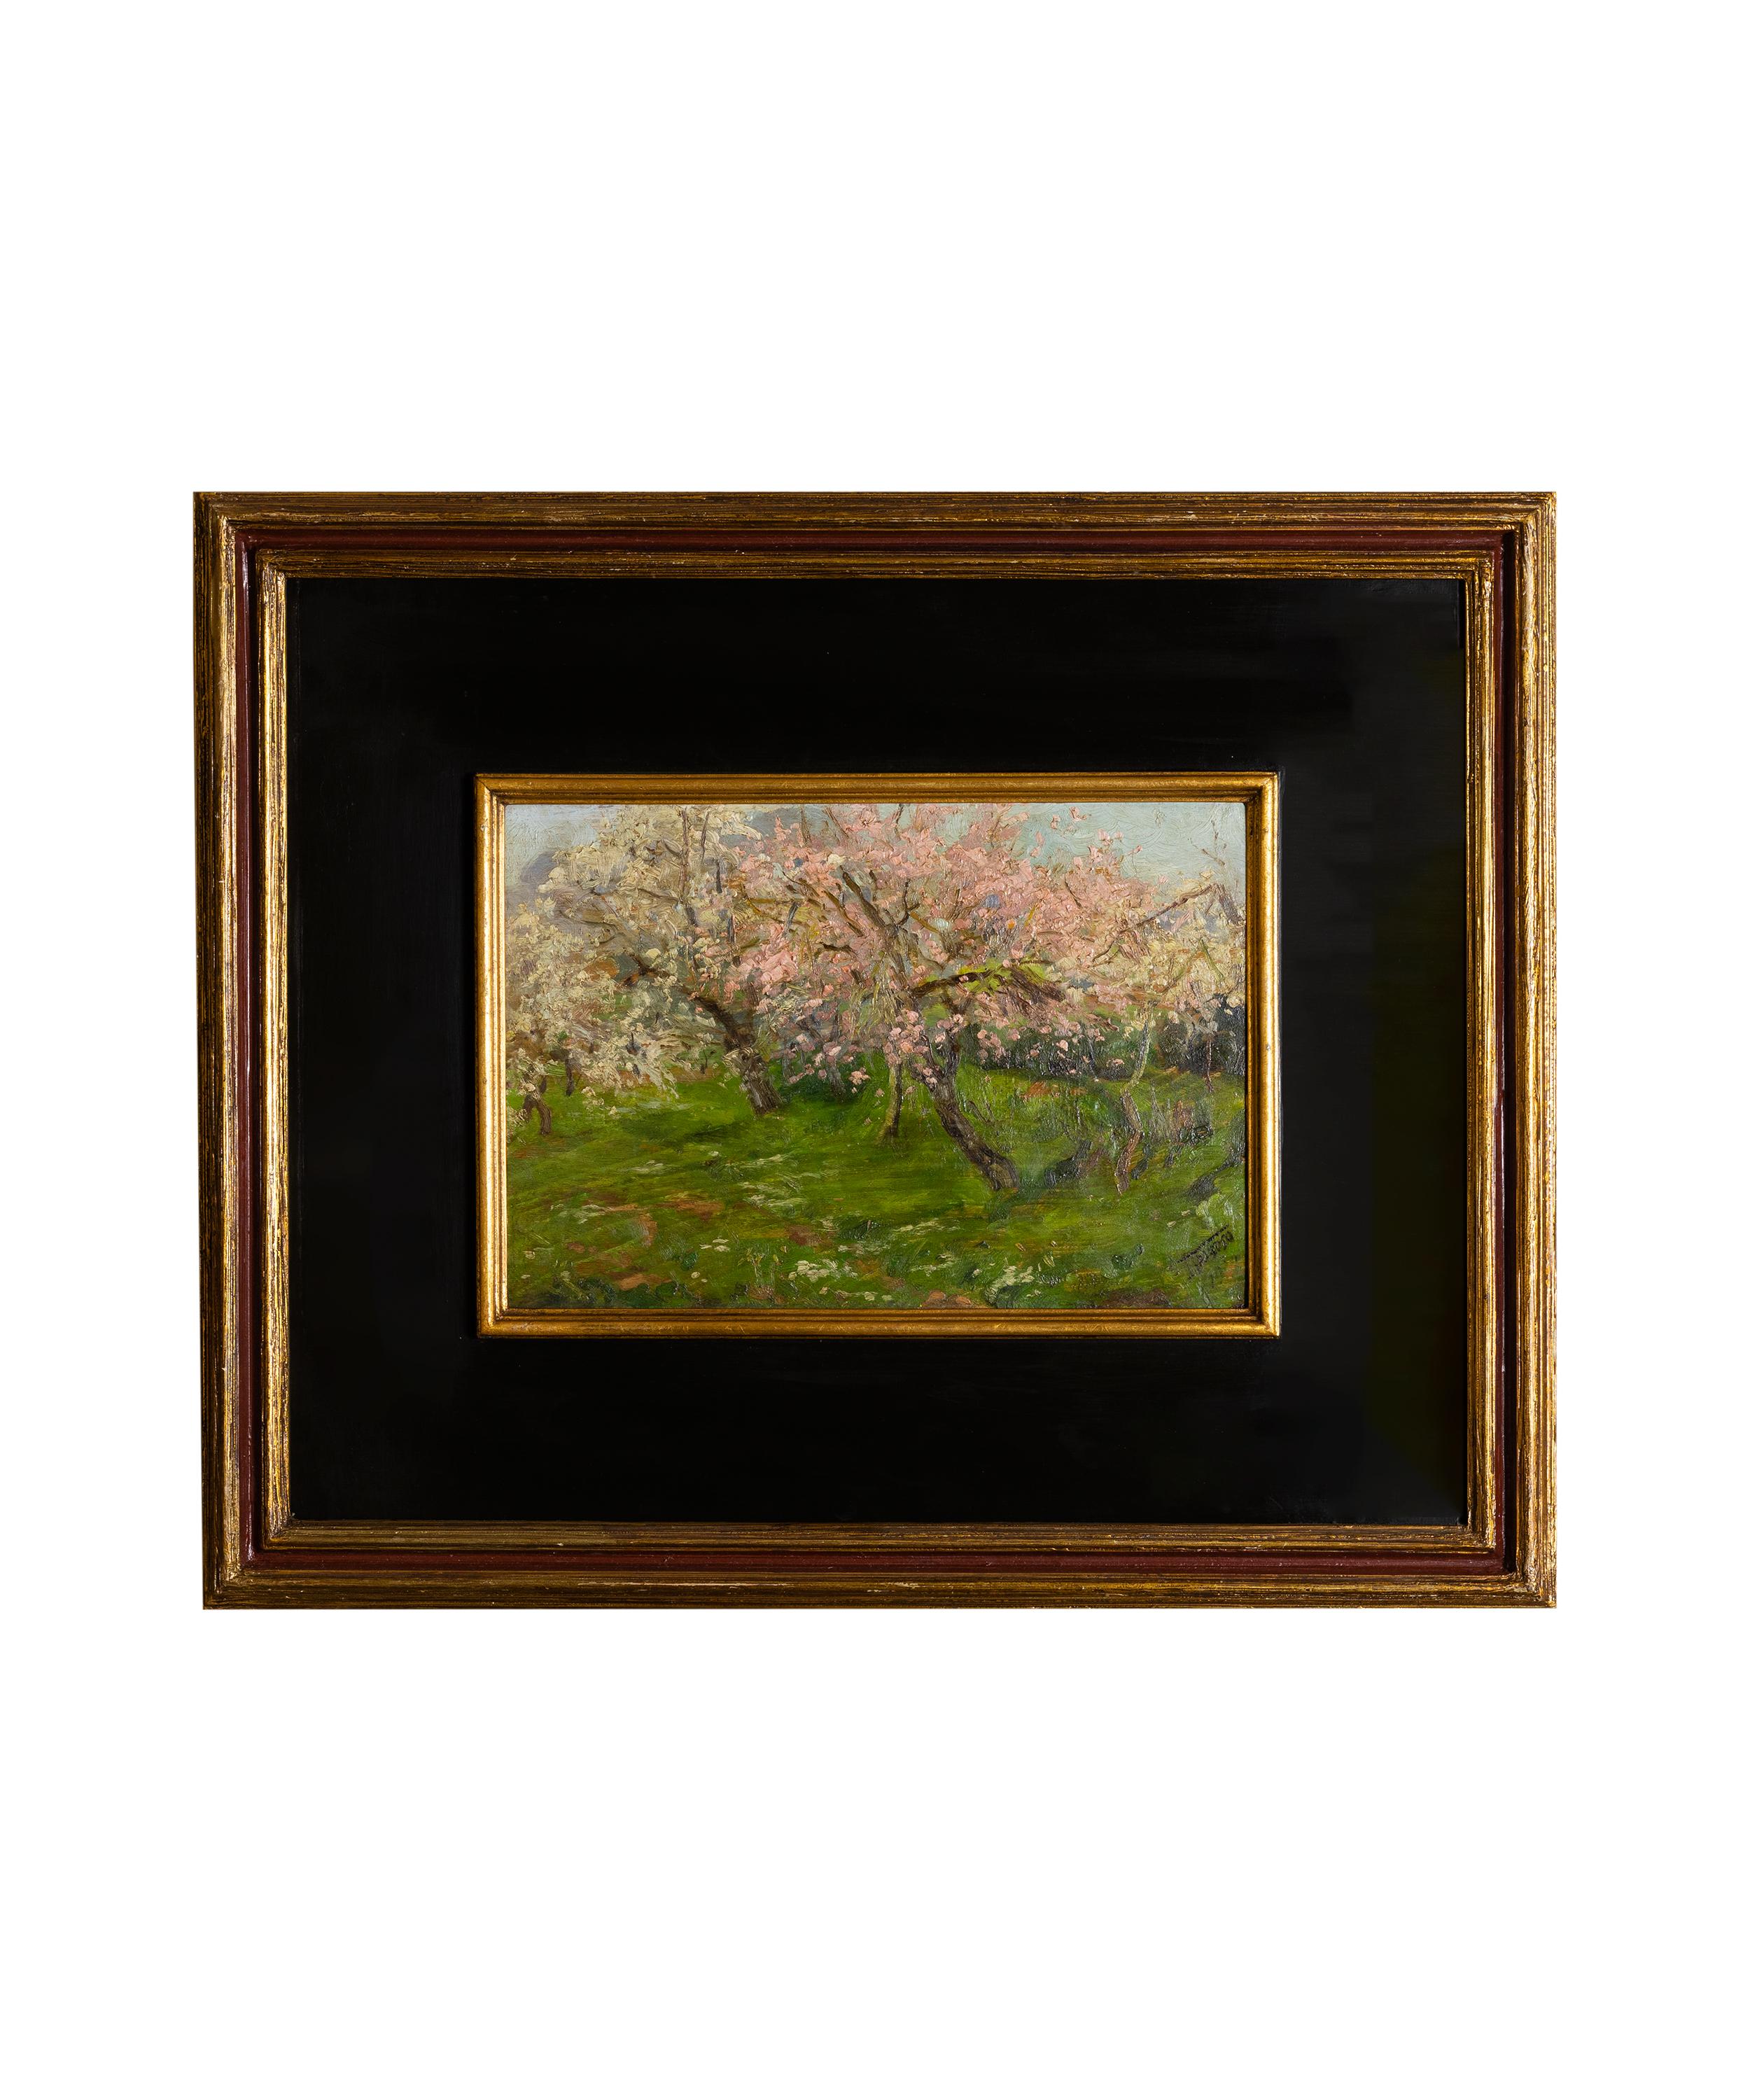 Portuguese Tree Blossom Painting By Falcão Trigoso, Naturalism, 20th Century For Sale